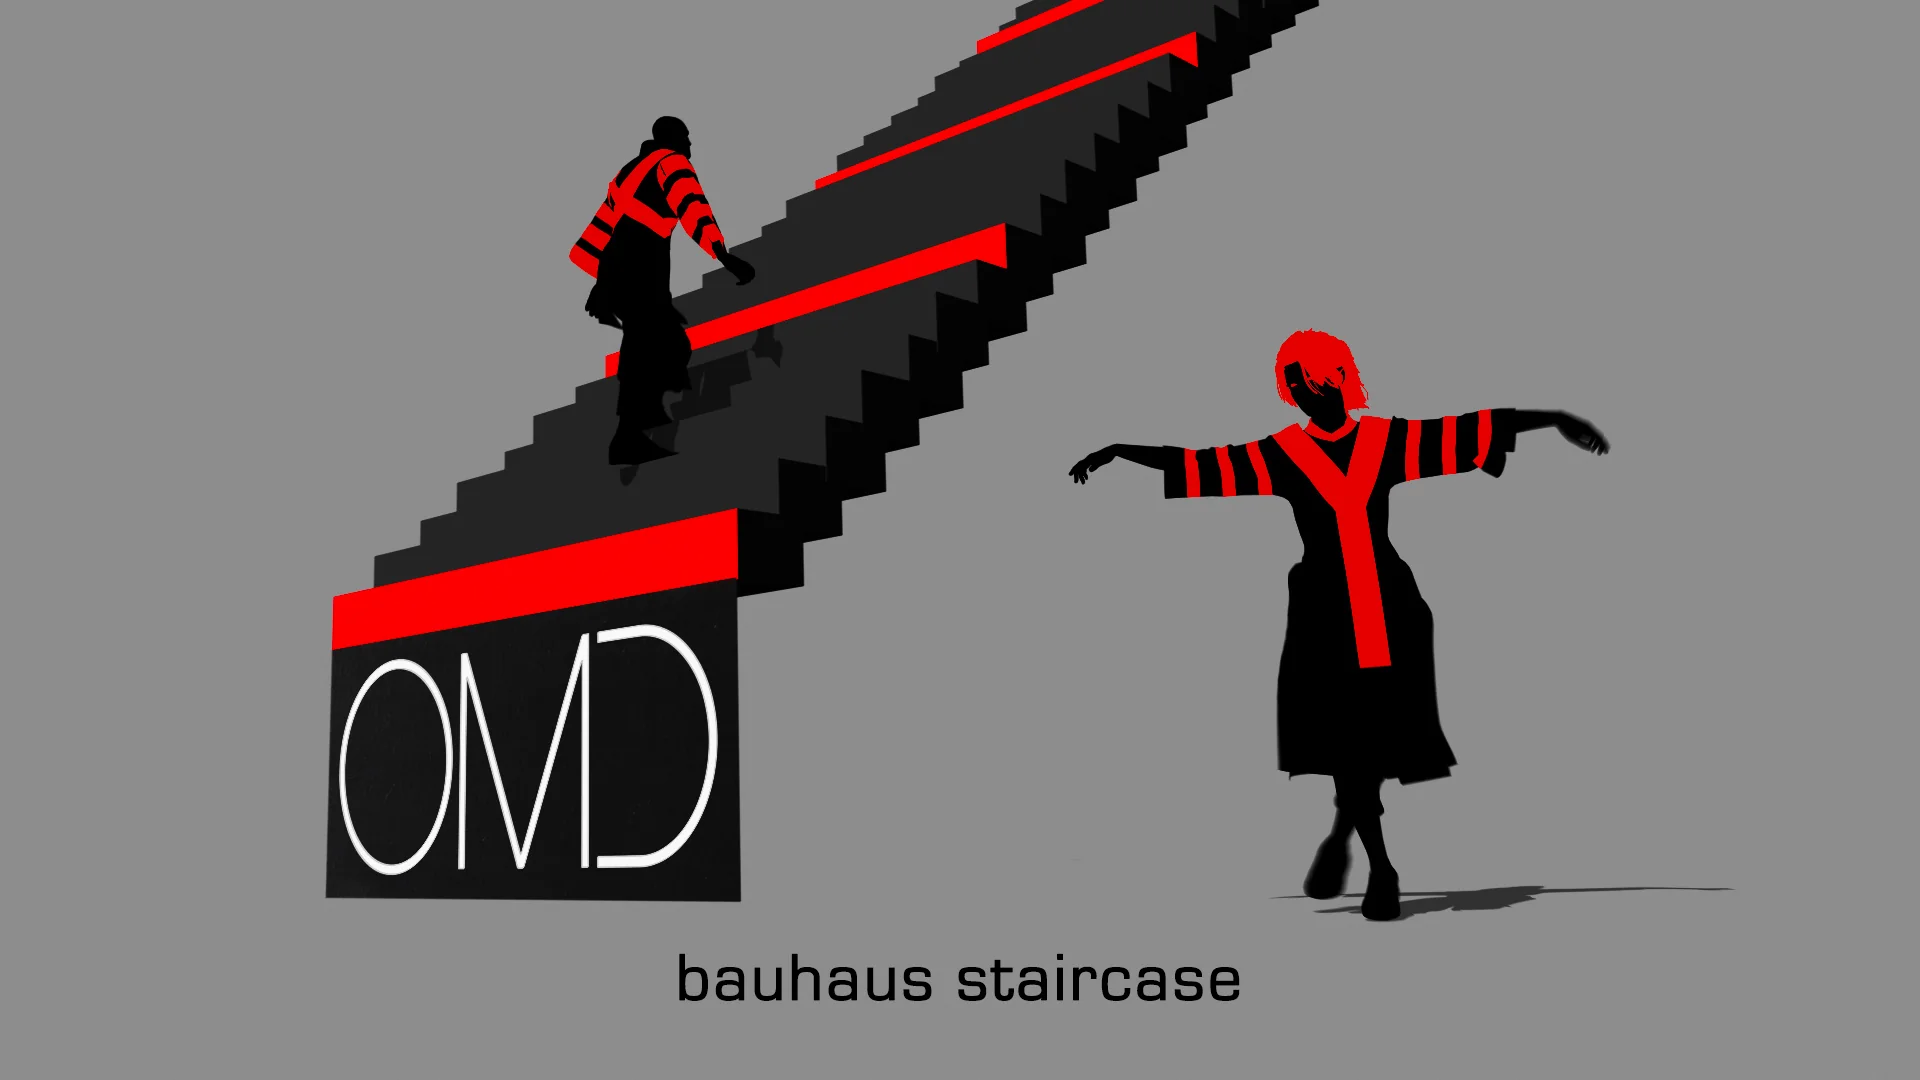 Record Of The Week! OMD – Bauhaus Staircase